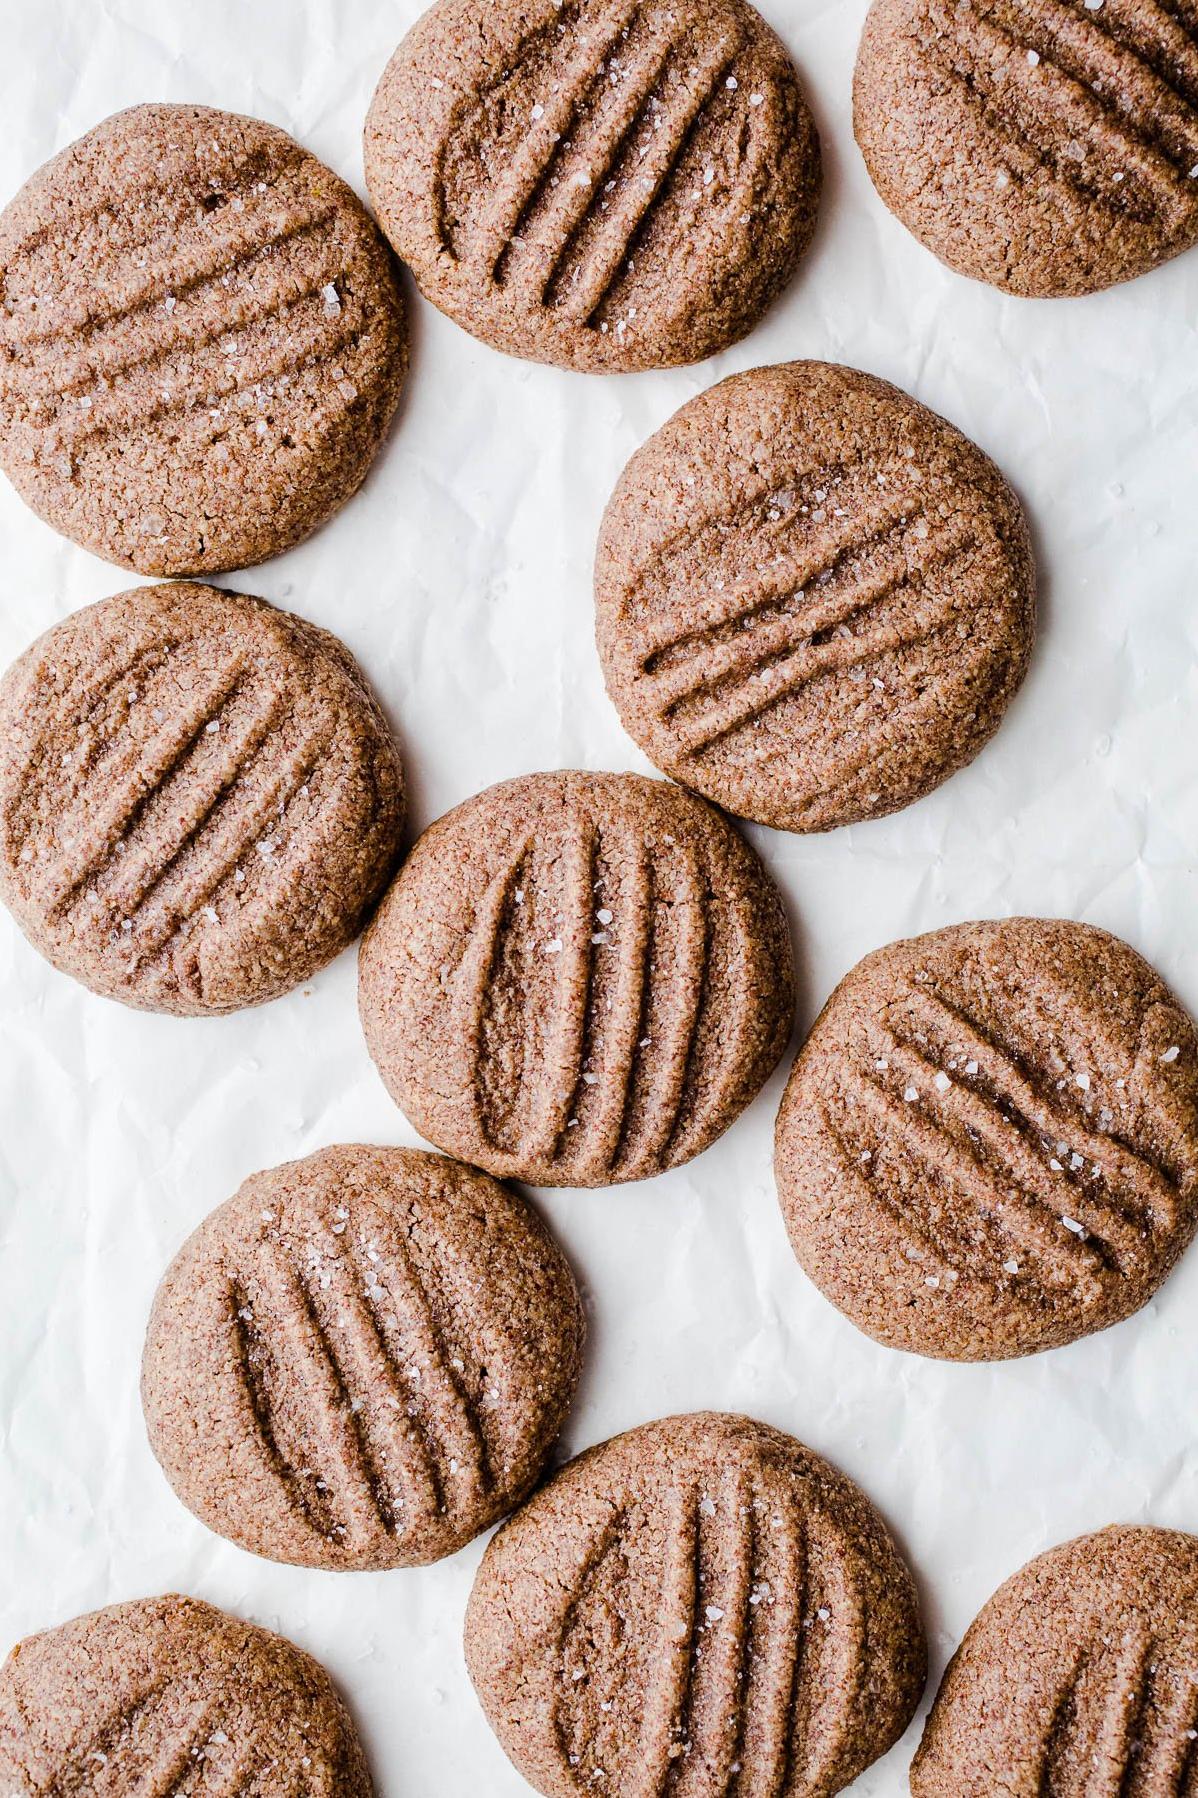  Satisfy your sweet tooth with a batch of these soft, chewy cookies made with almond butter.